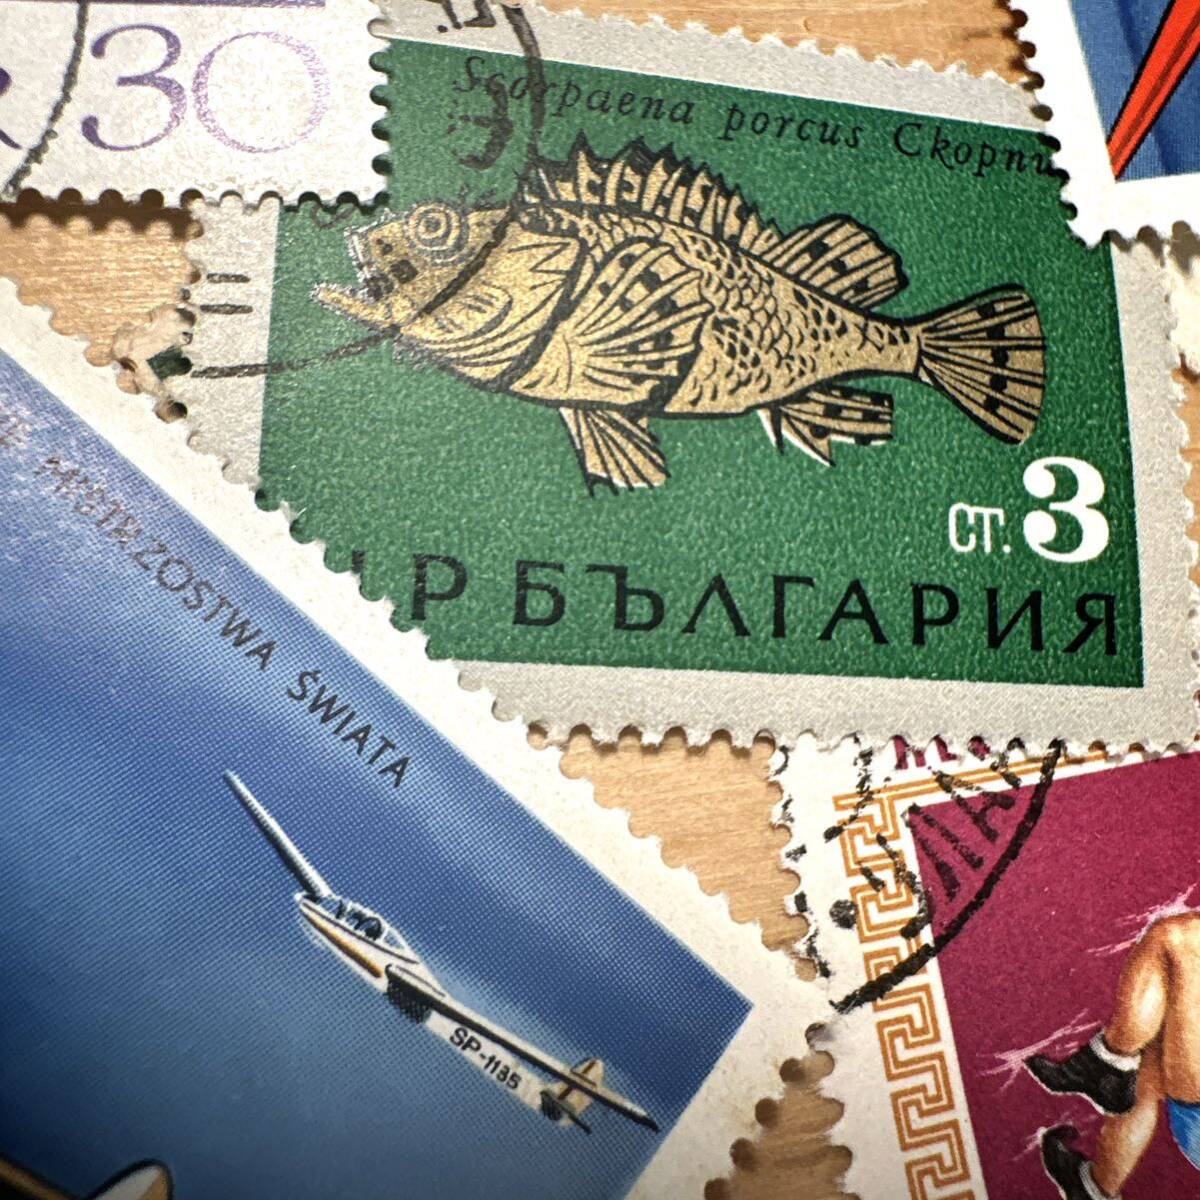  foreign used . stamp various . summarize 